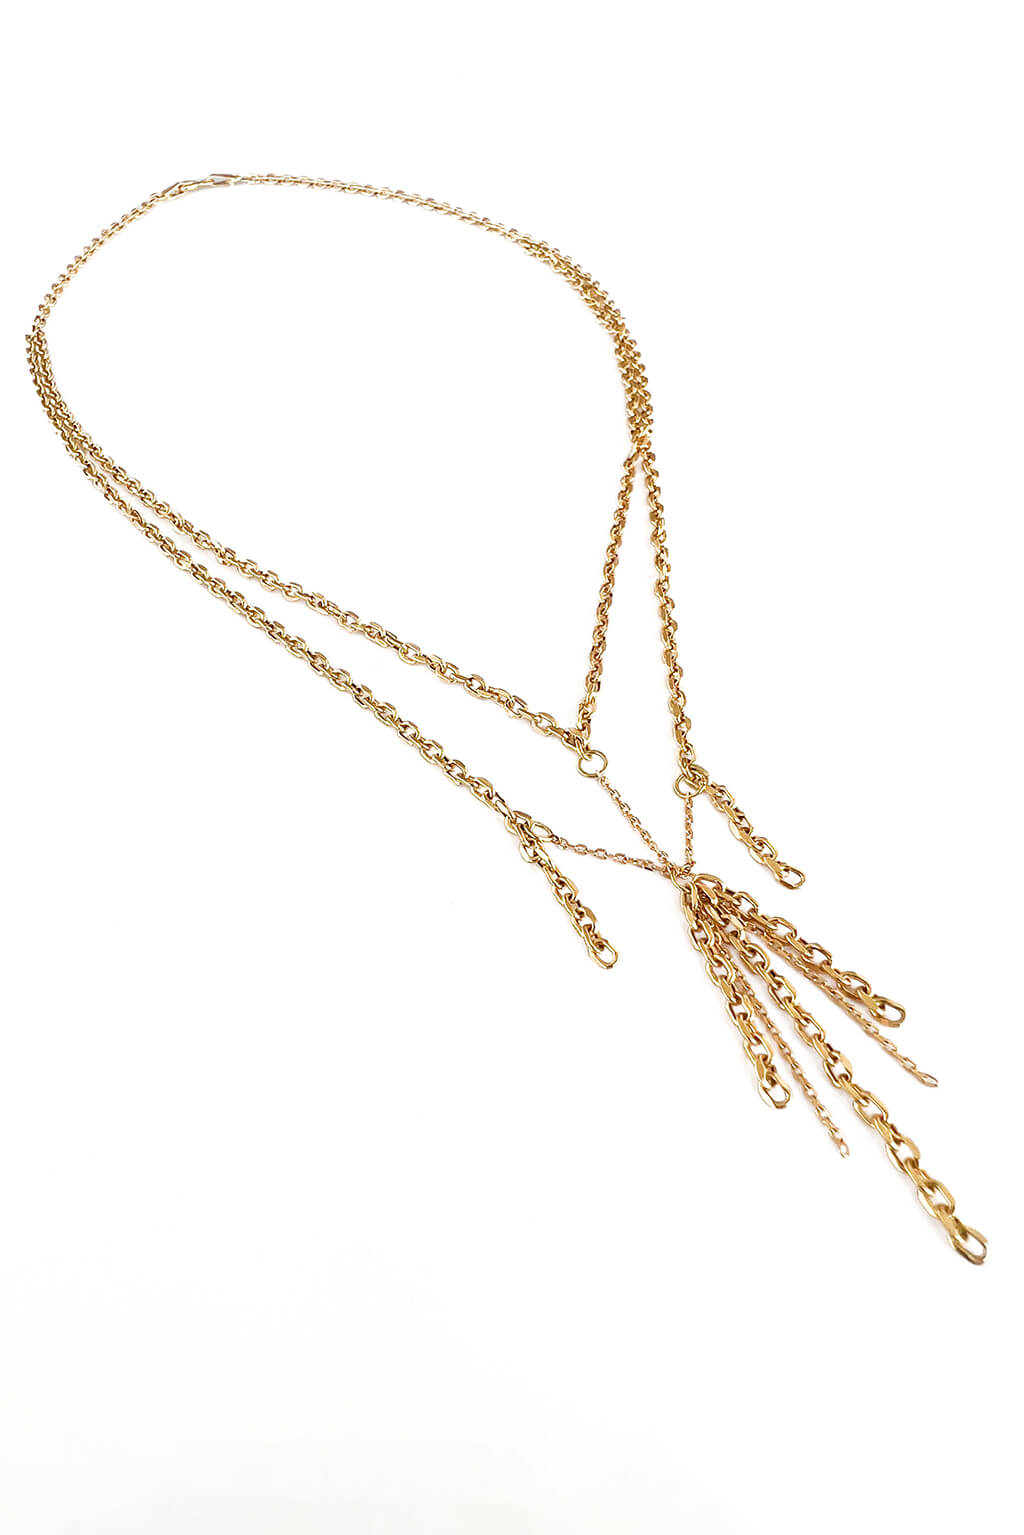 Loose ends gold necklace